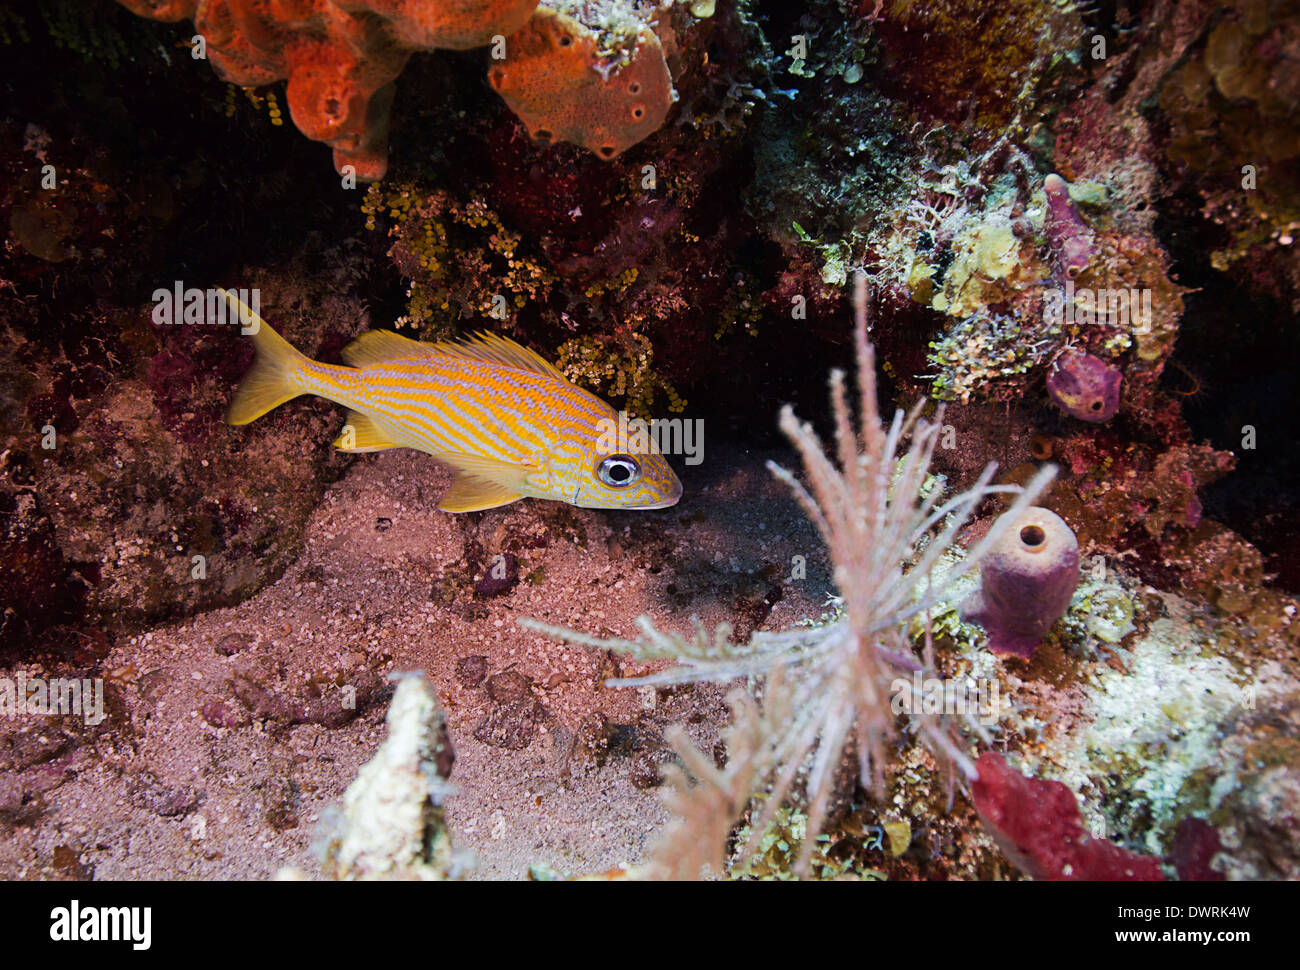 A French Grunt on the reef in Roatan, Honduras. Stock Photo